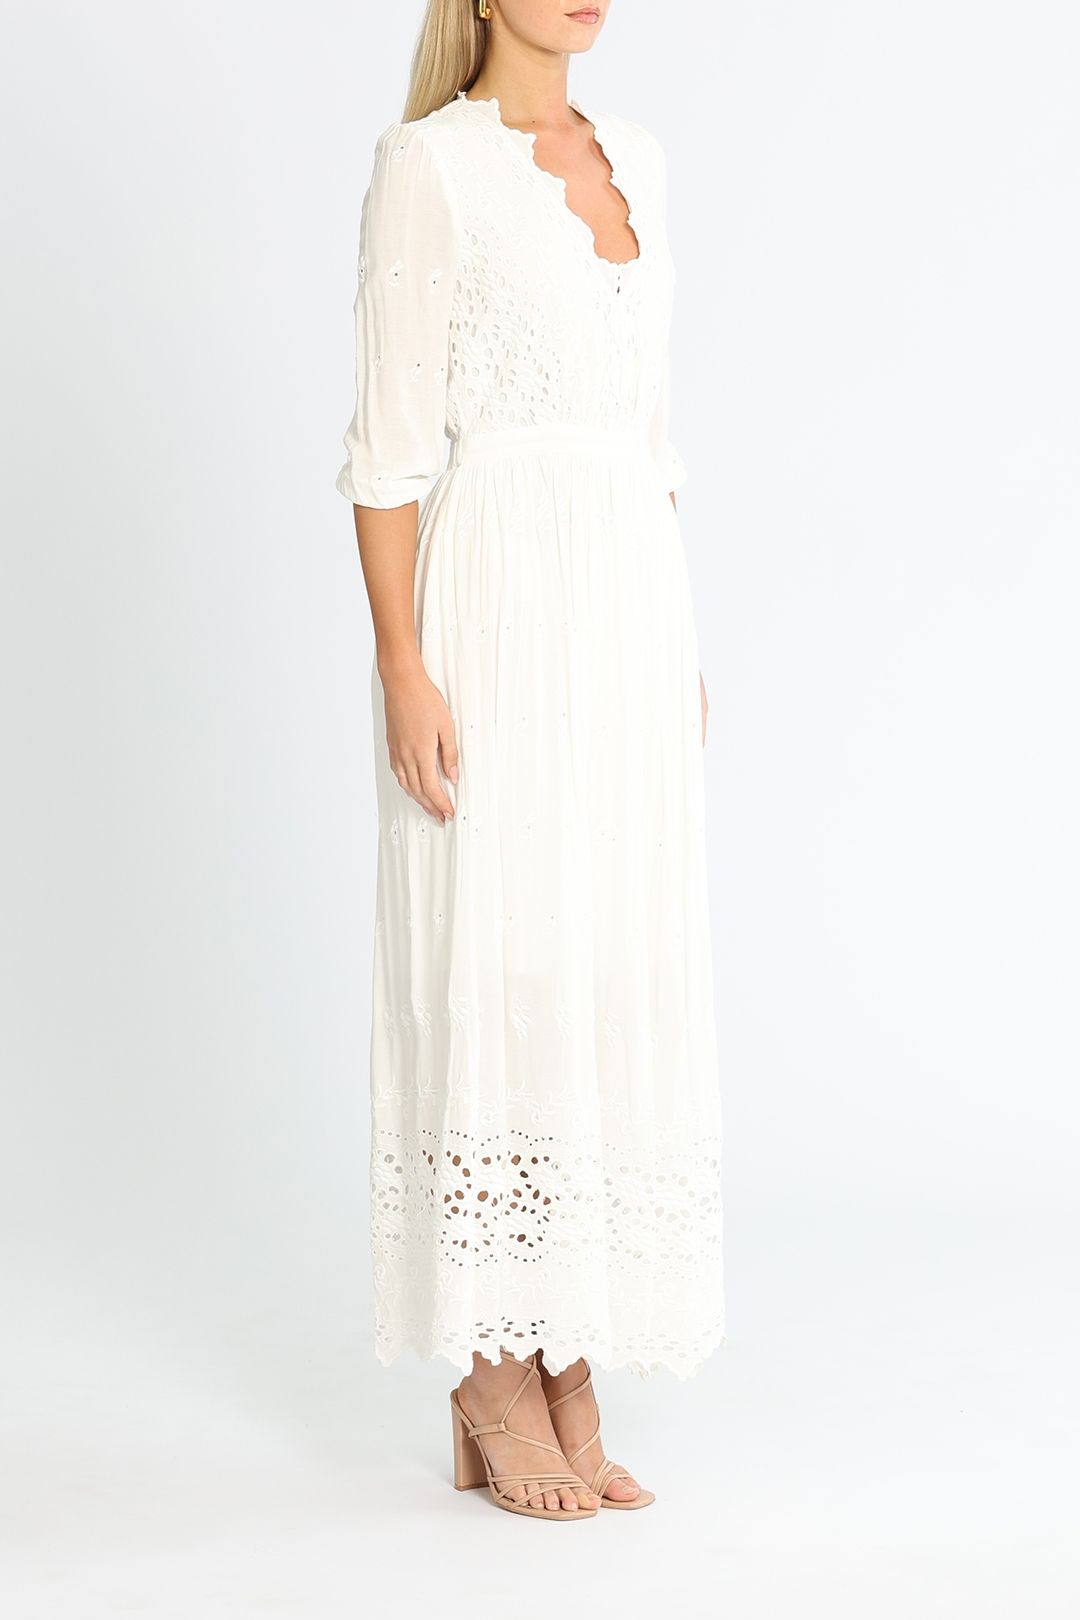 Belle and Bloom All Eyes On Me Midi Dress Lace